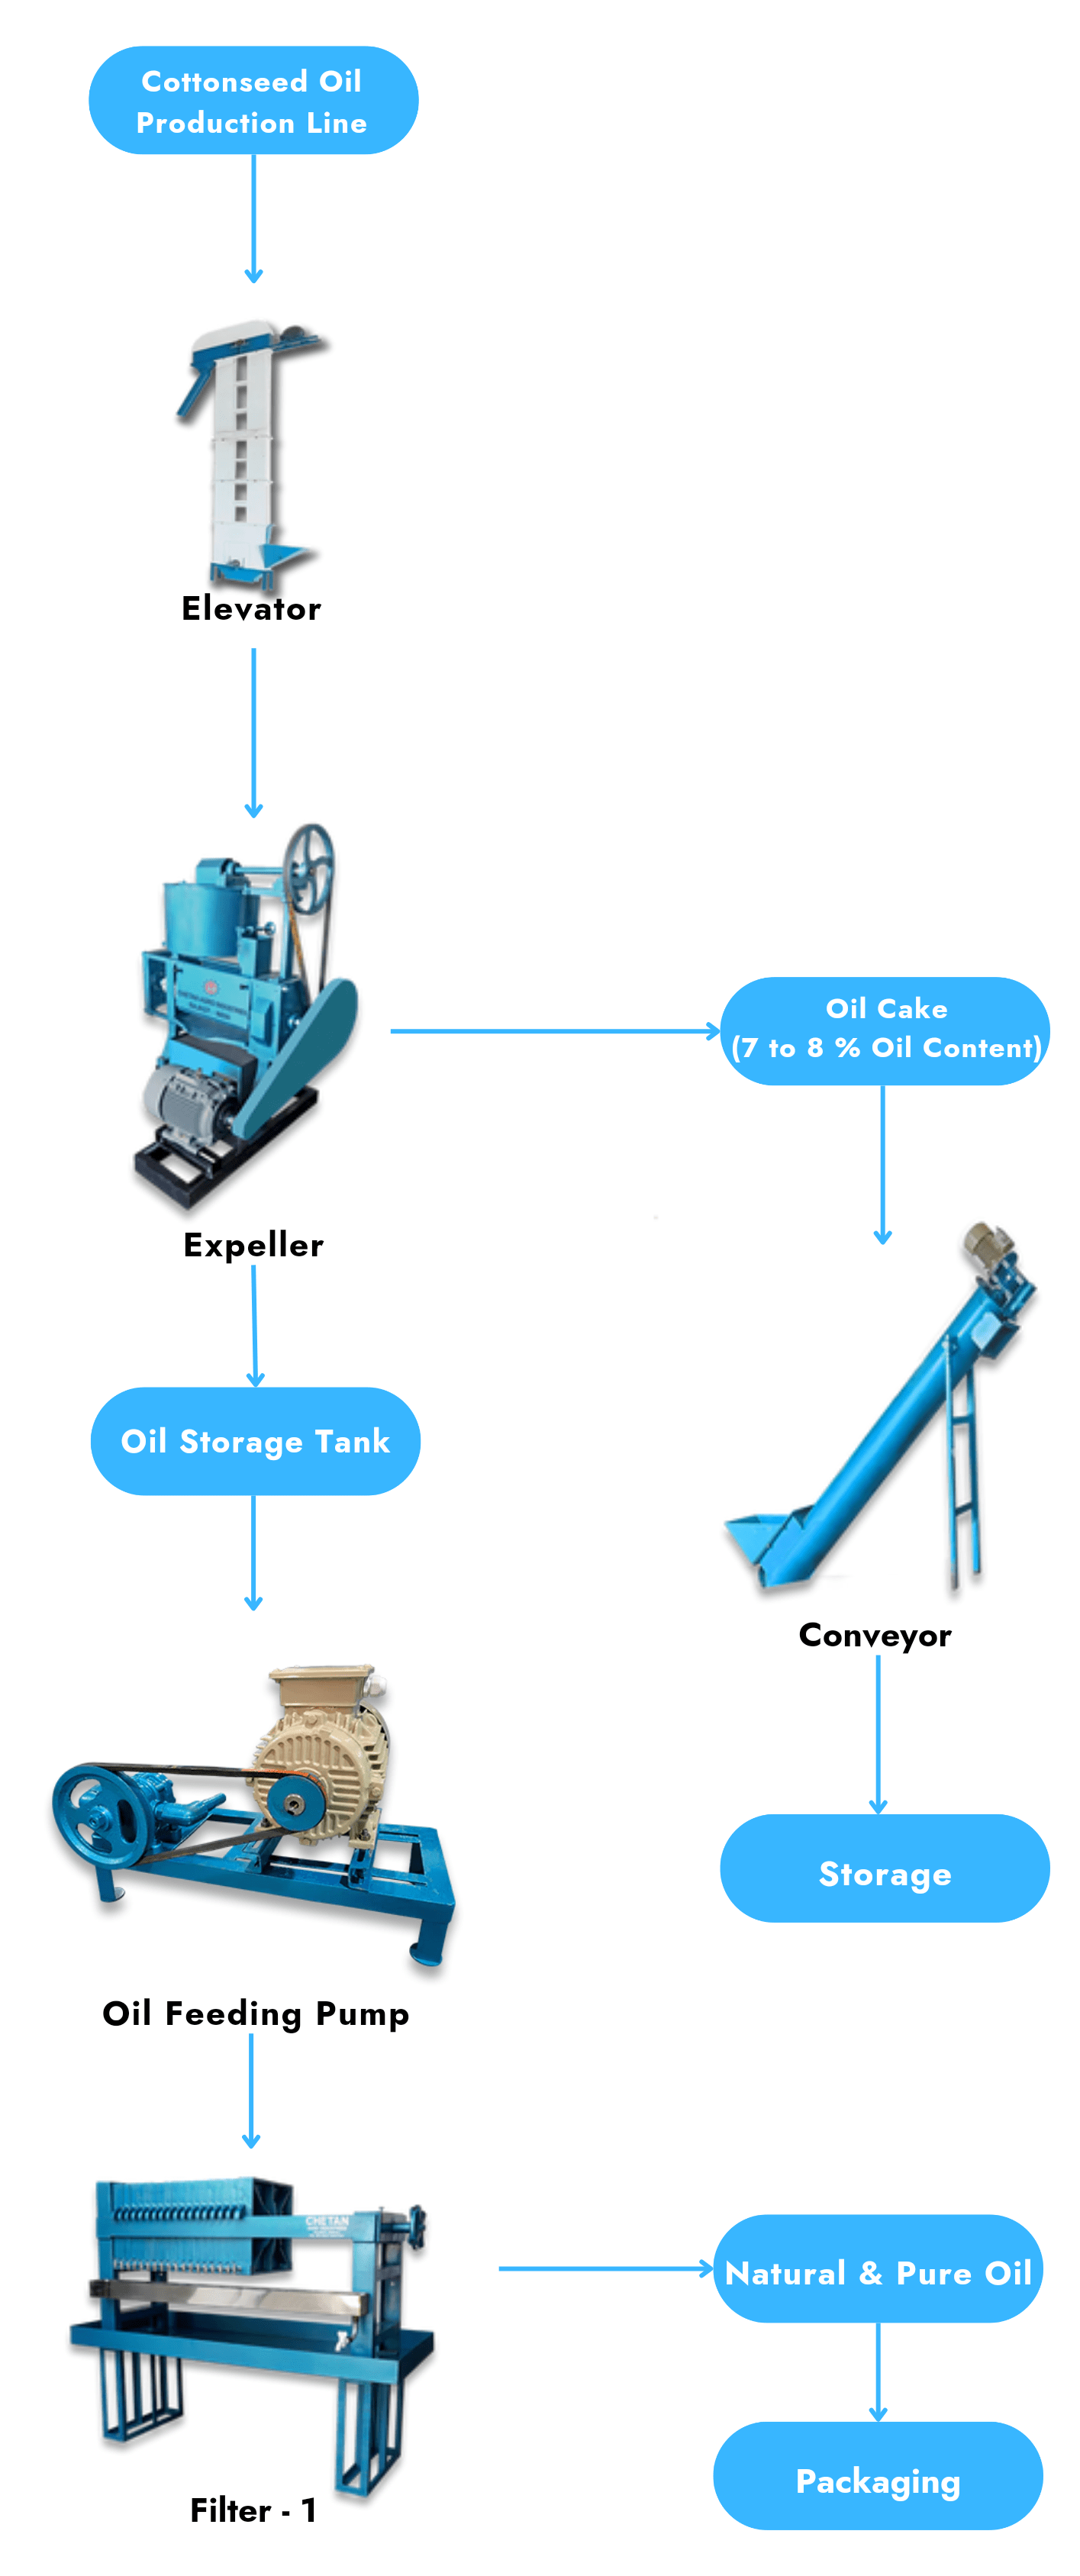 Flowchart: Cottonseed Oil Production Workflow Diagram